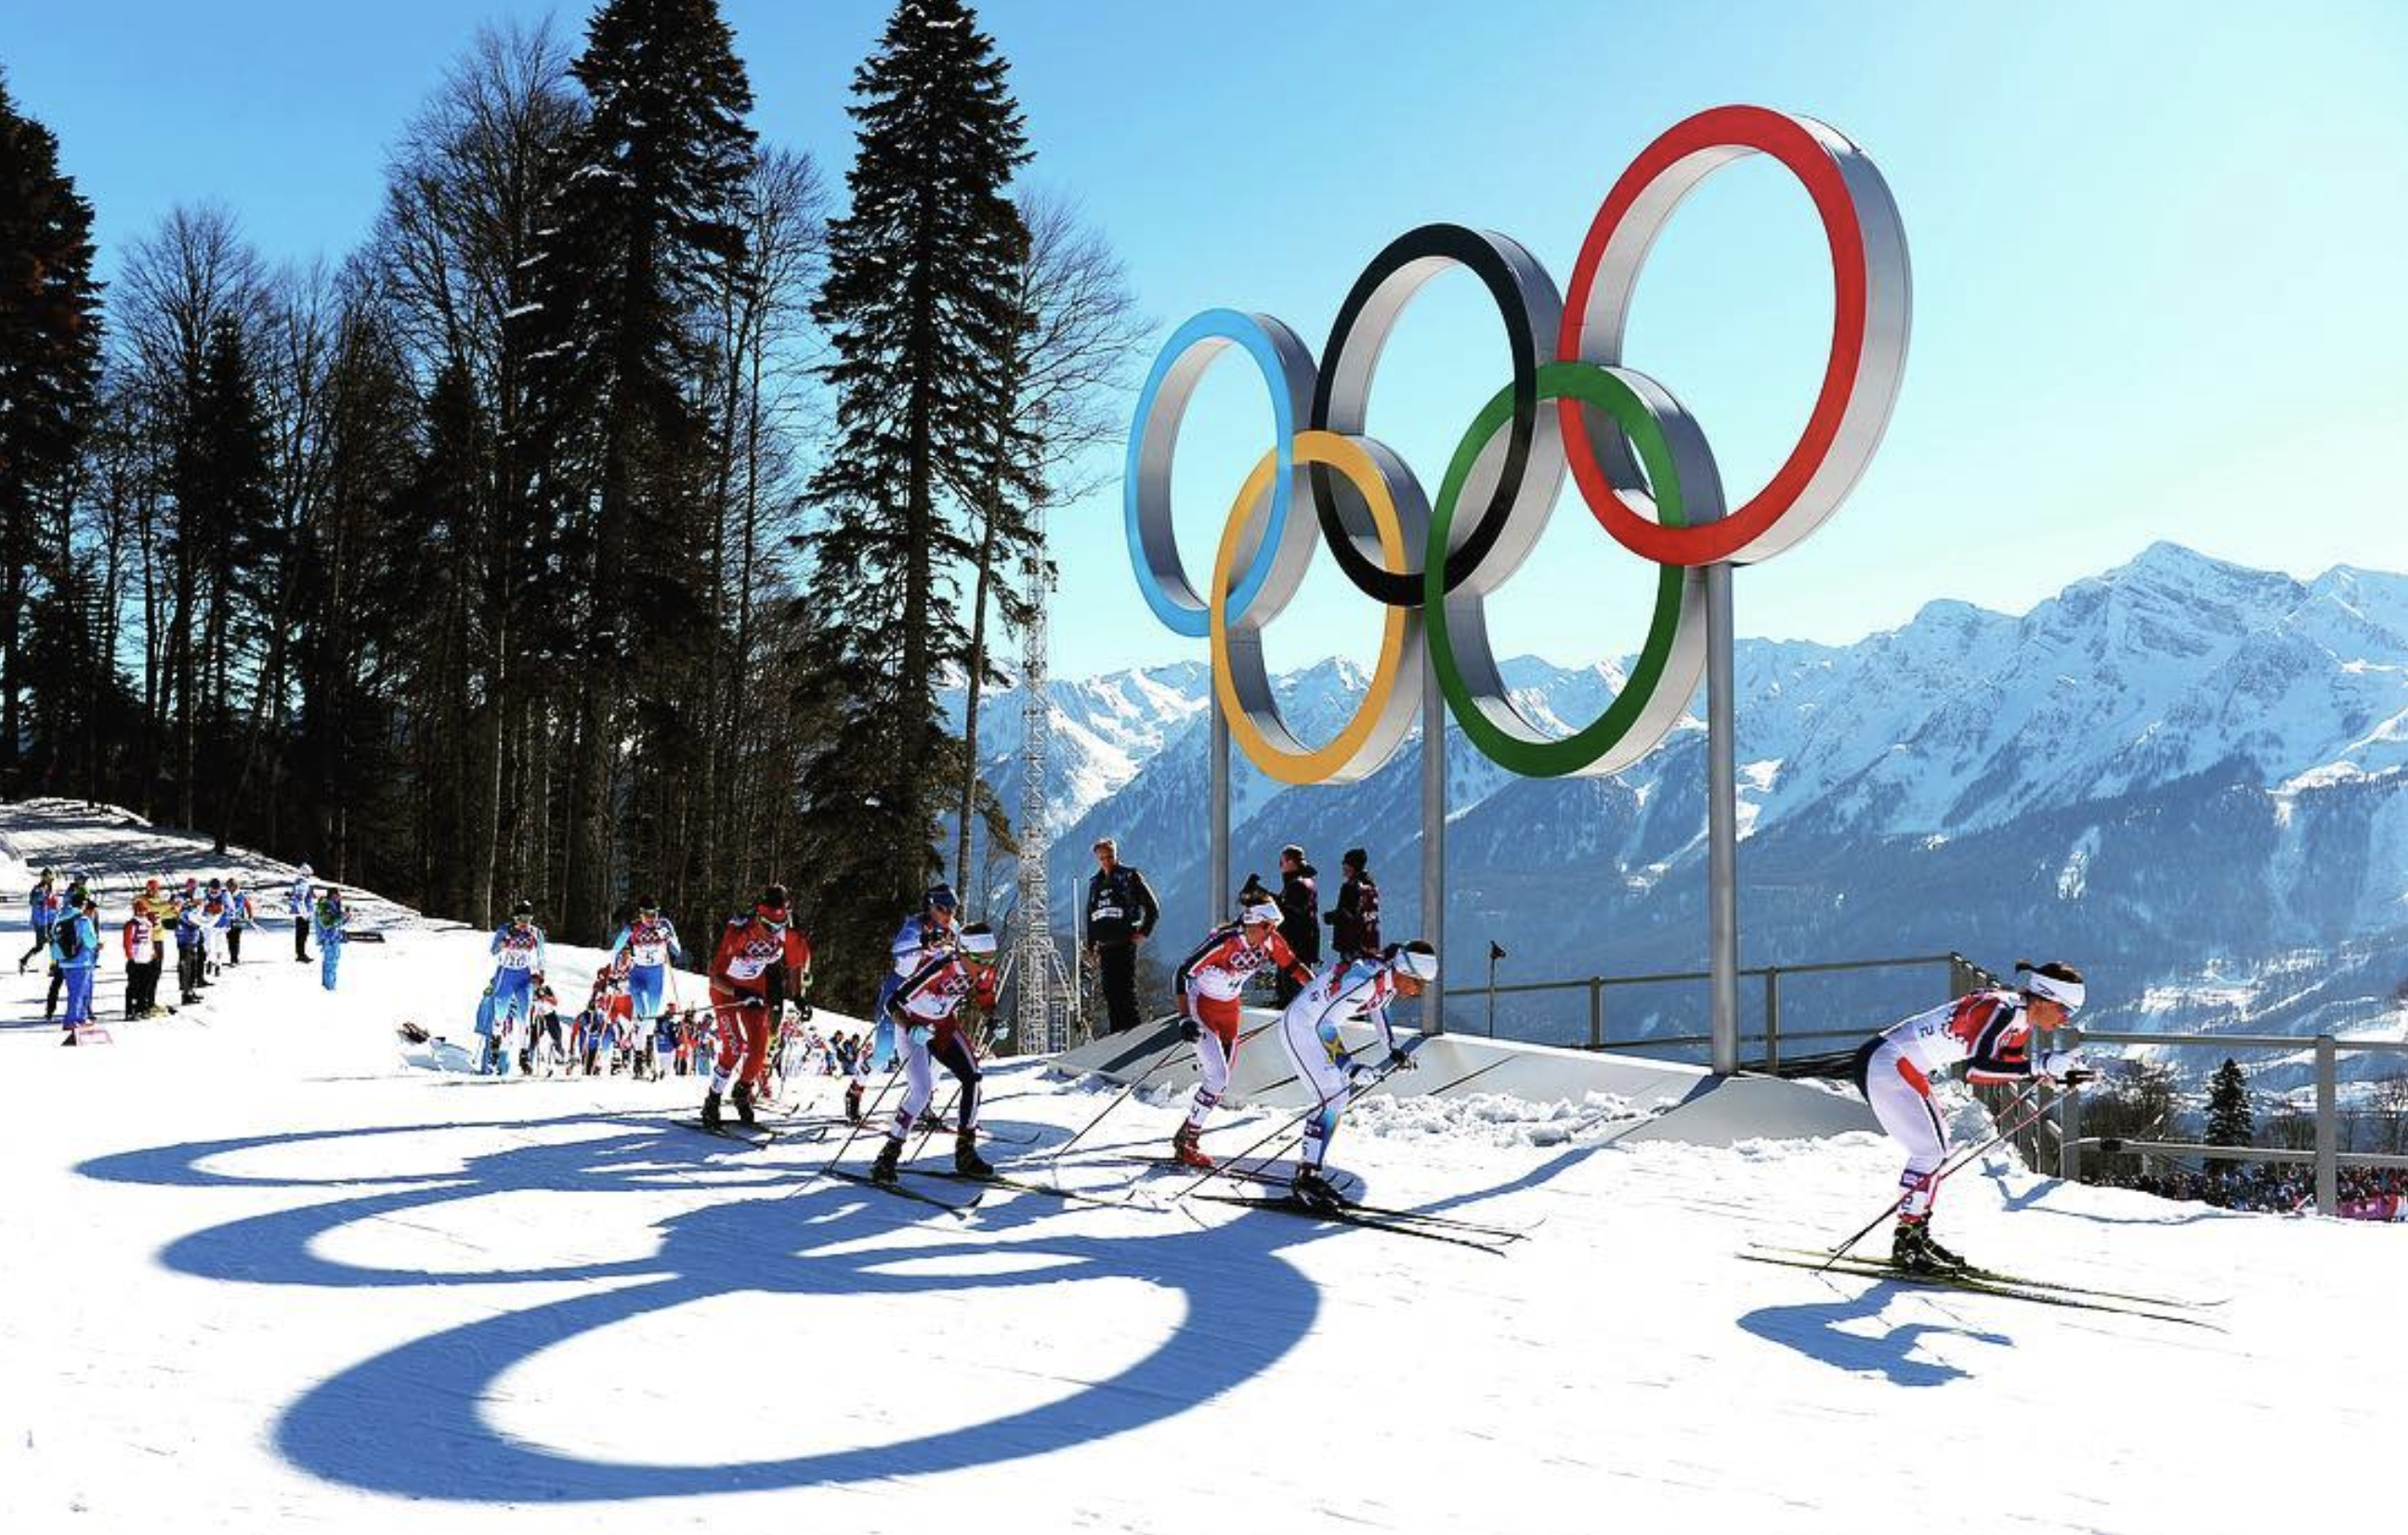 So, how much do the Winter Olympics really cost?